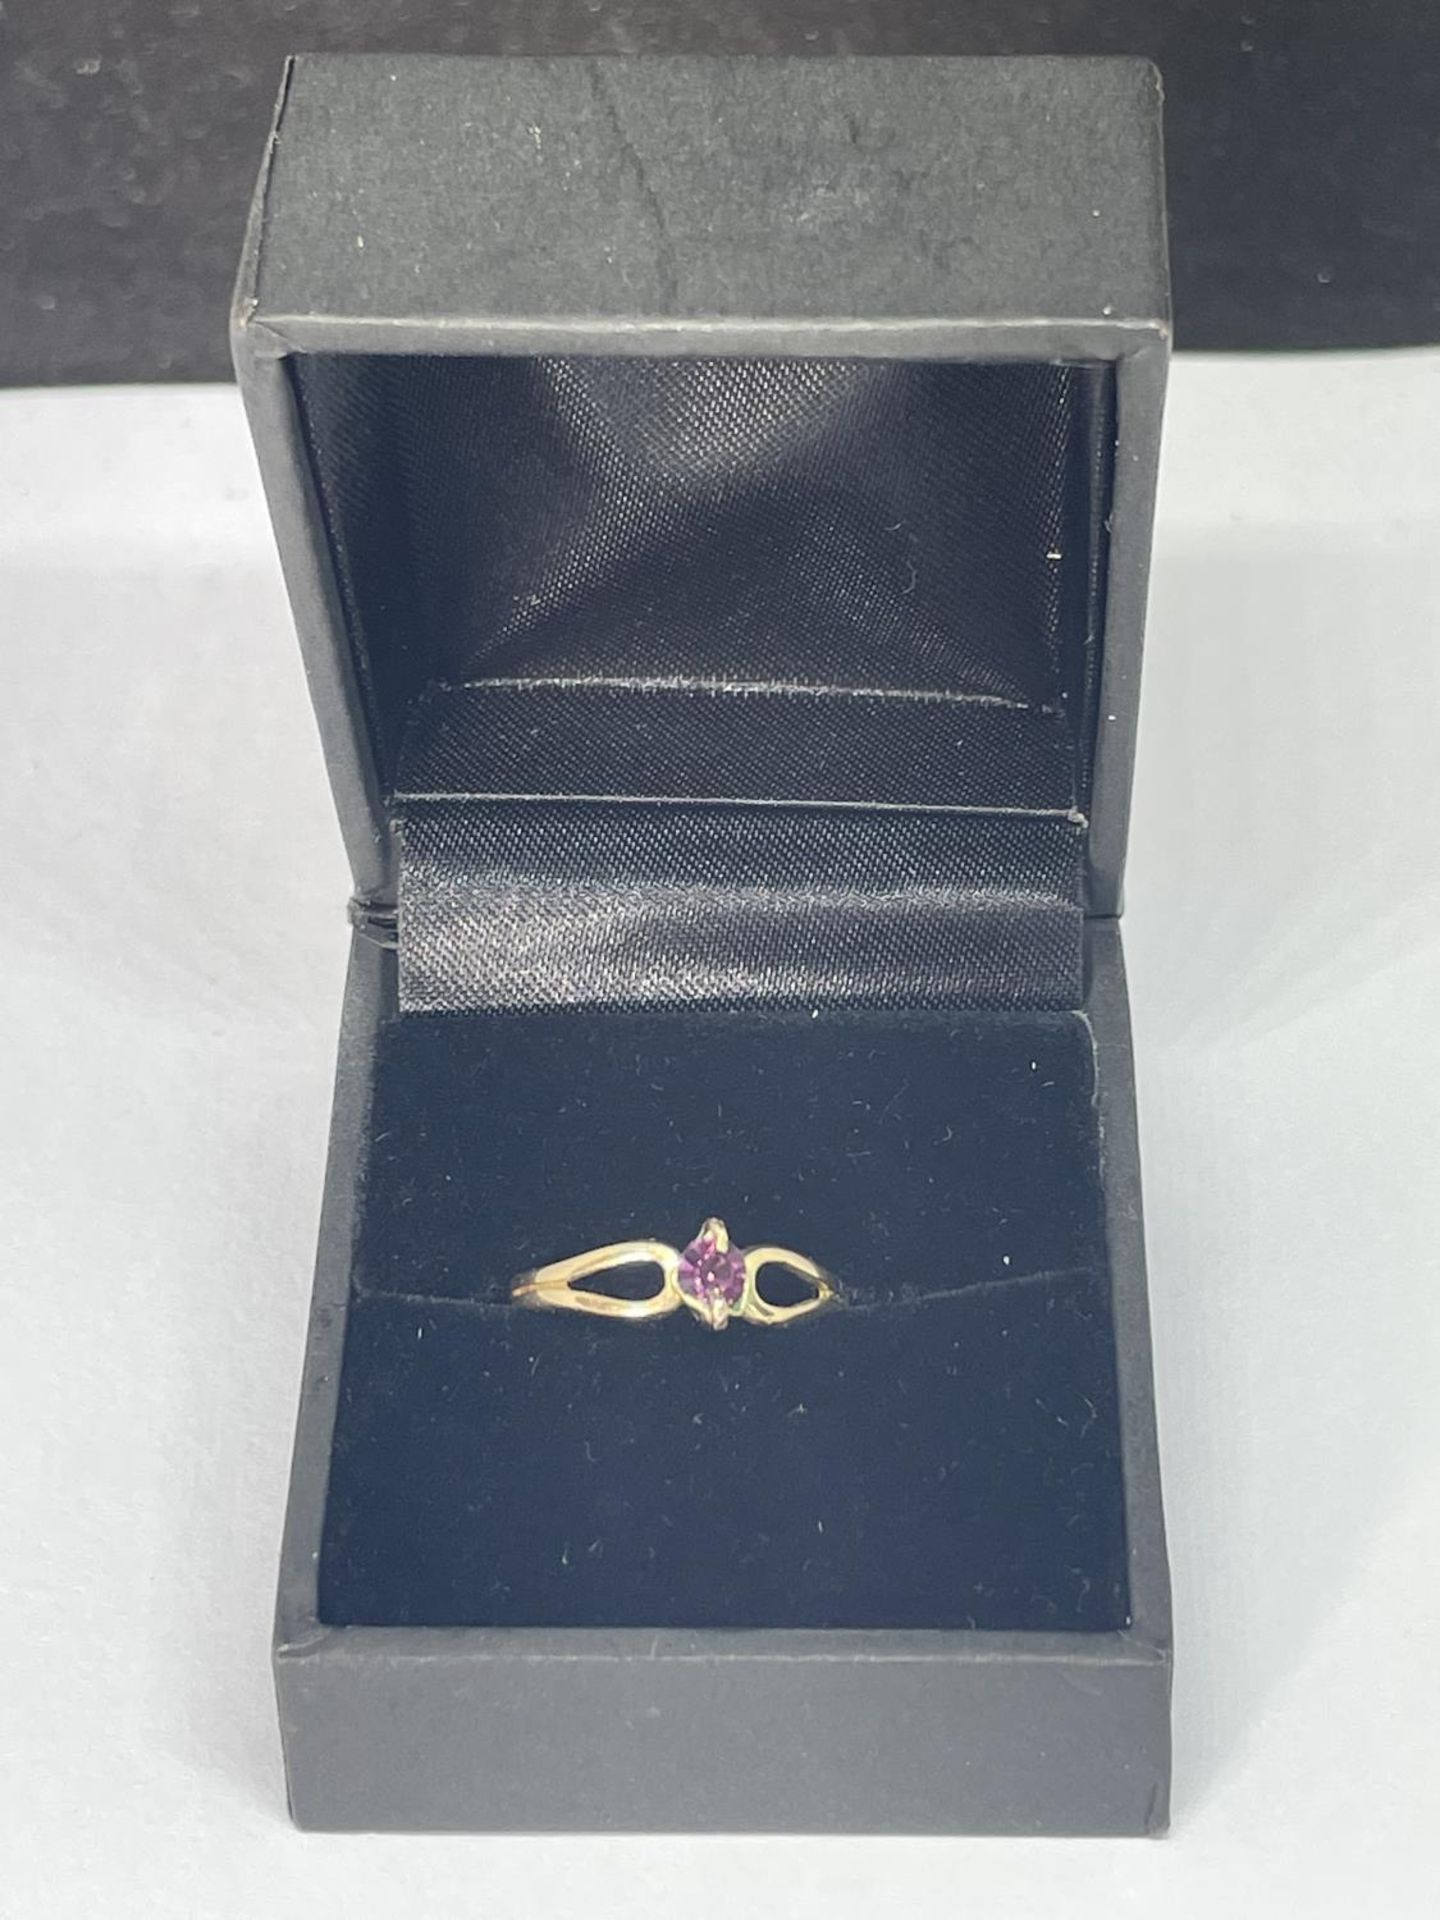 A 14 CARAT GOLD RING WITH A SINGLE PURPLE STONE SIZE M/N IN A PRESENTATION BOX - Image 4 of 5